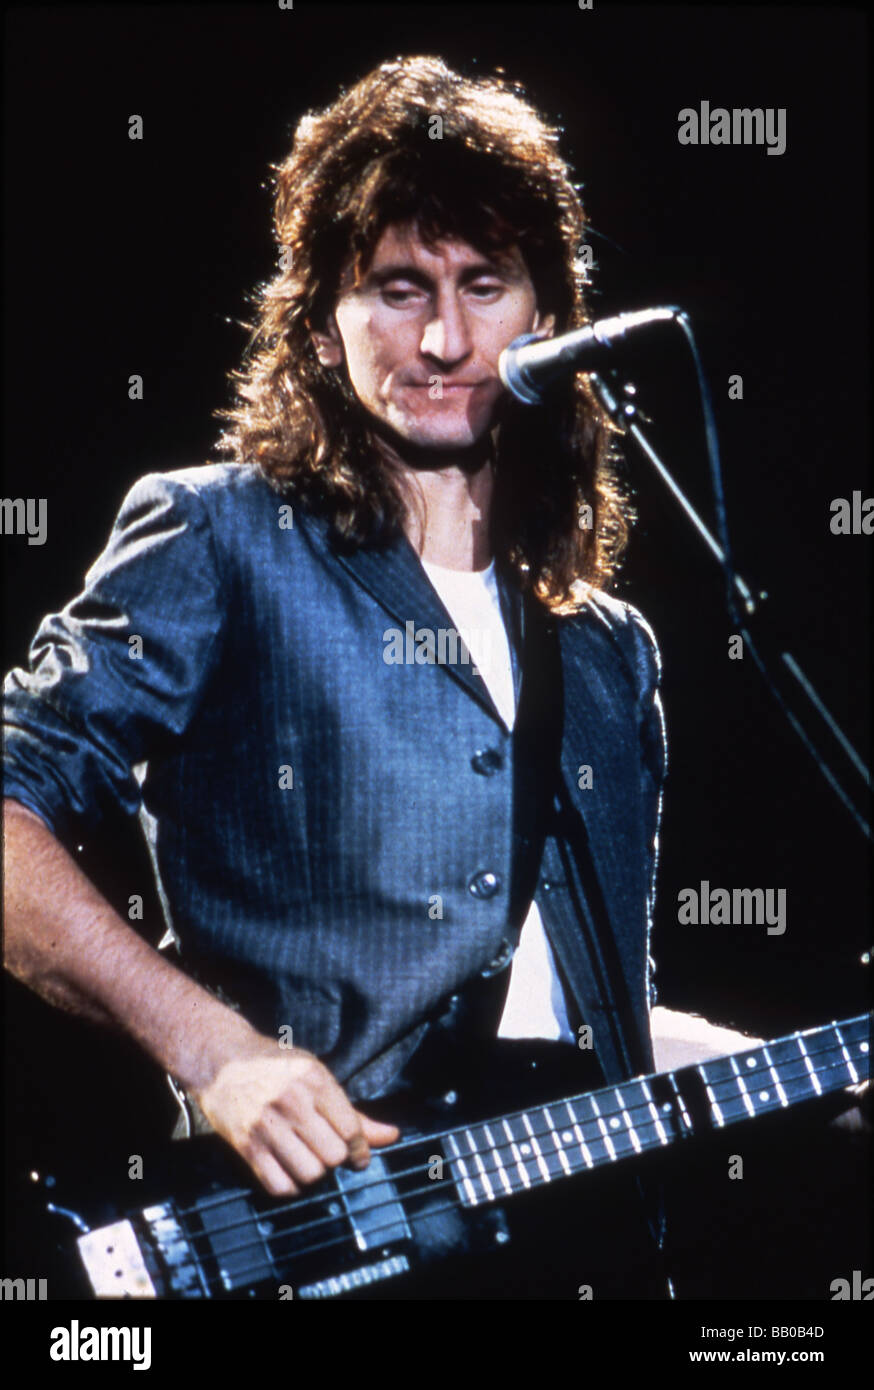 RUSH US rock group with bass player Geddy Lee about 1982 Stock Photo - Alamy